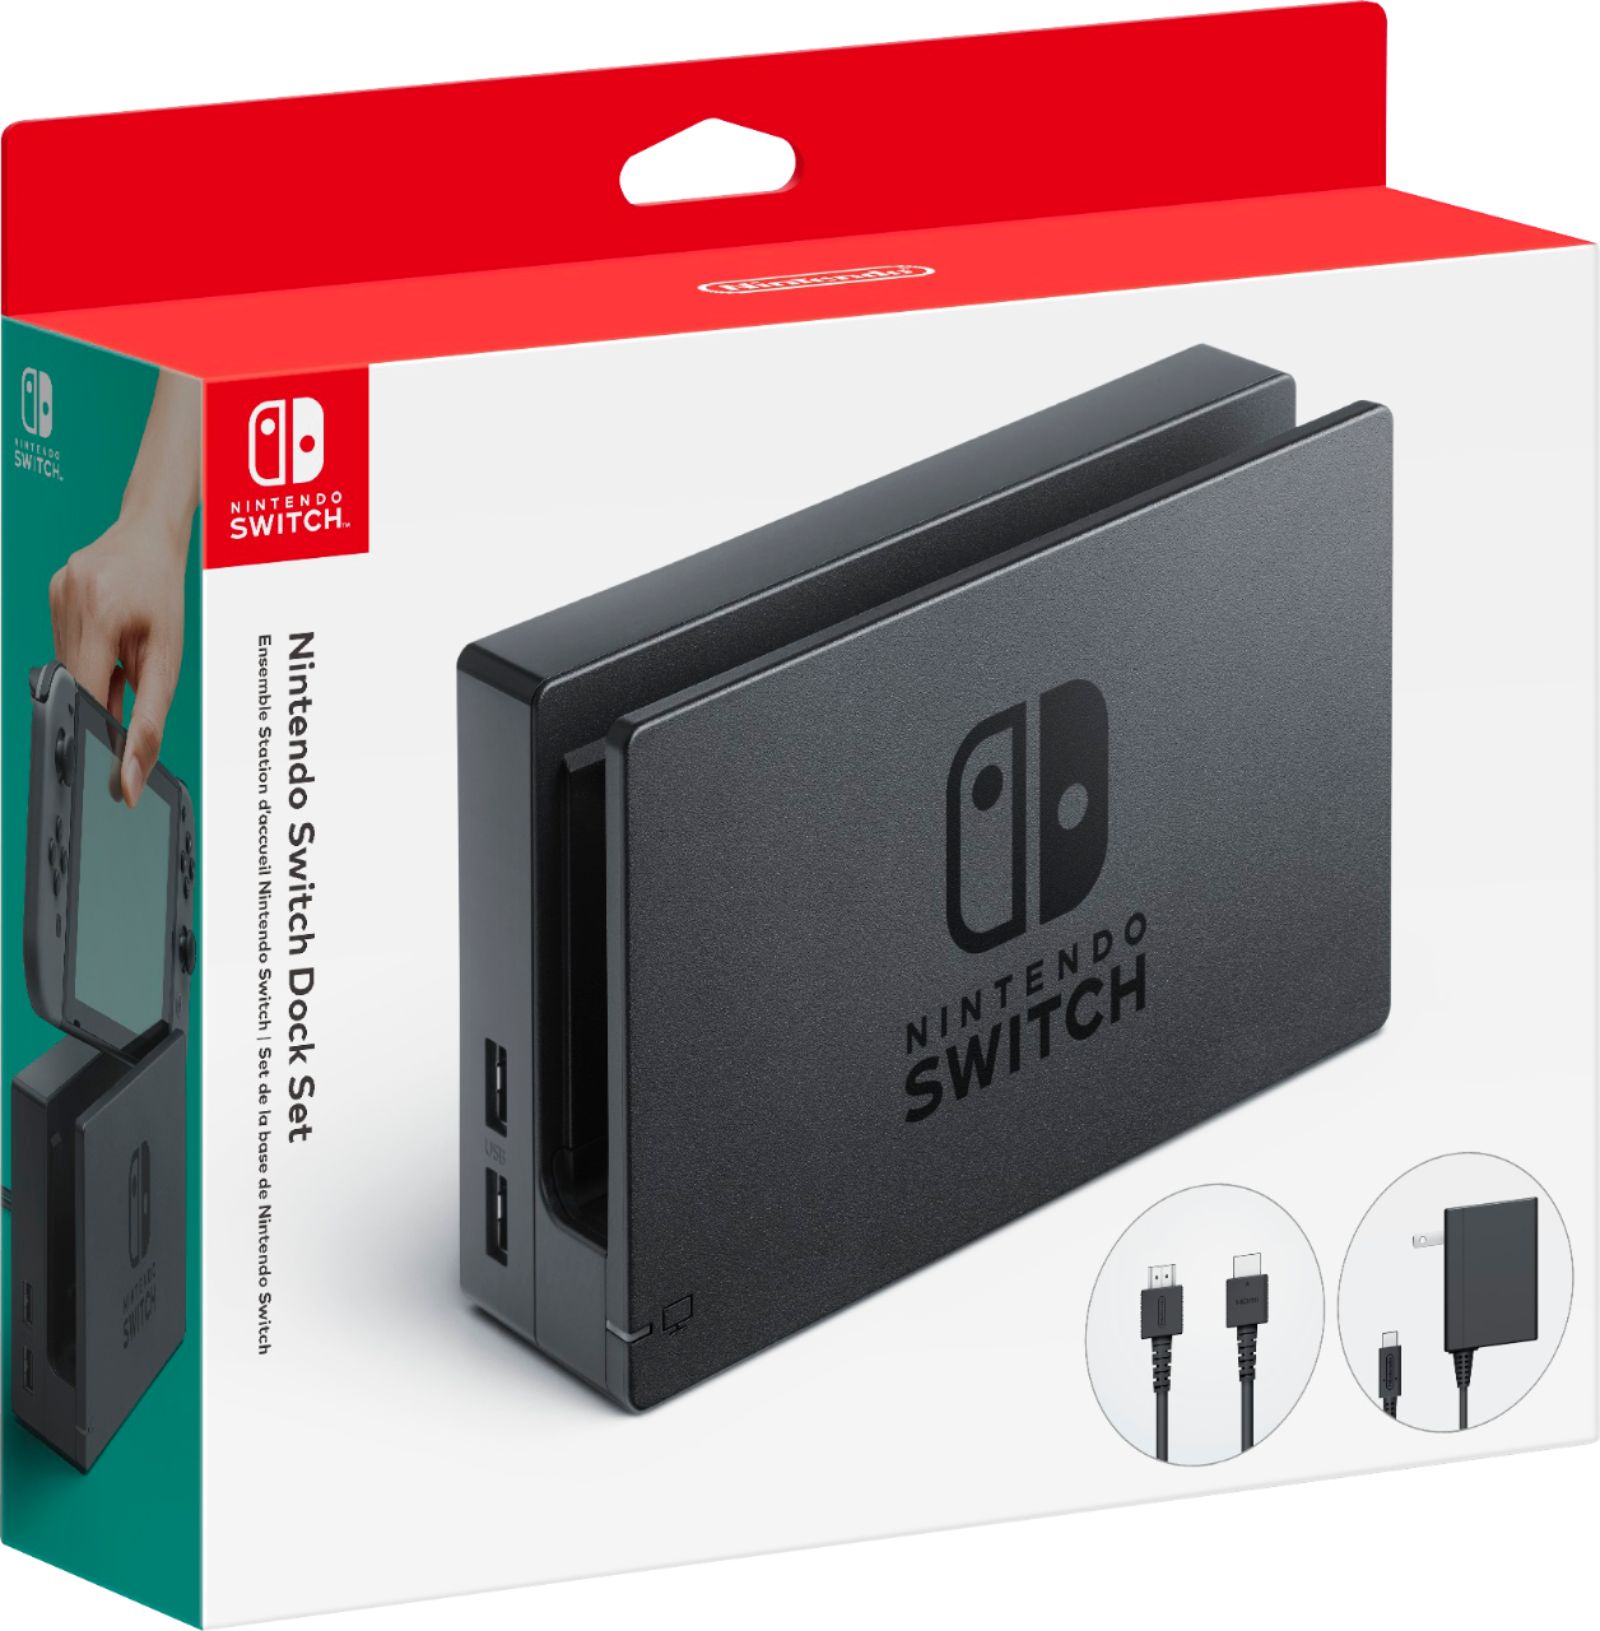 where can i get a cheap nintendo switch